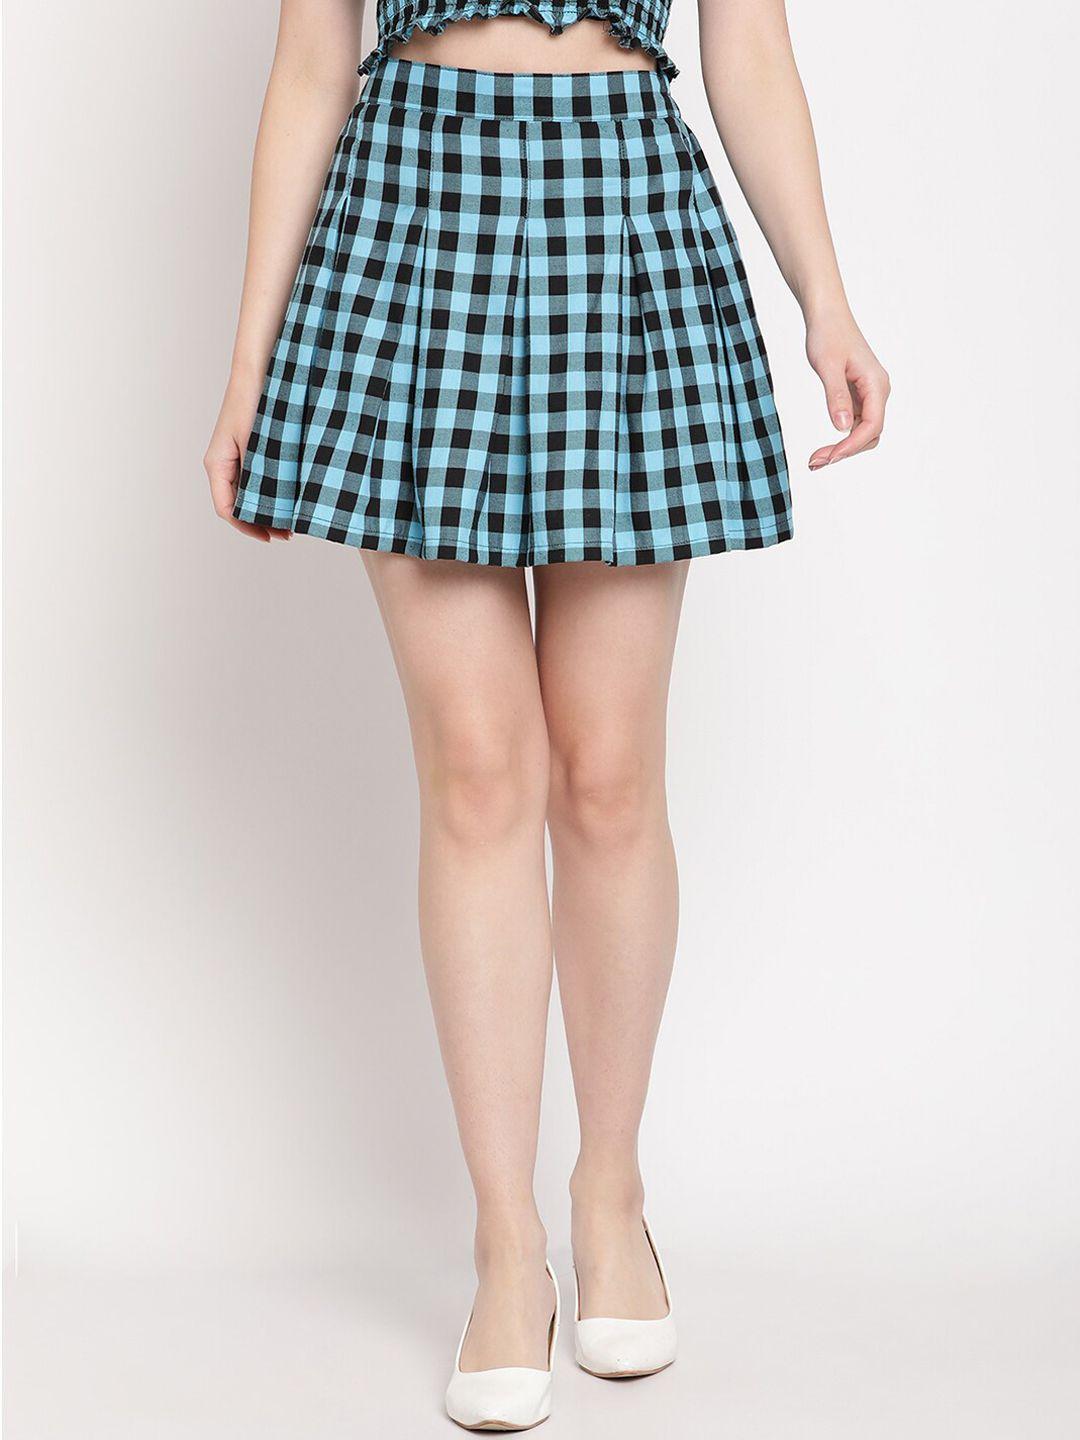 tag 7 women blue and black checked printed pleated knee-length skirt